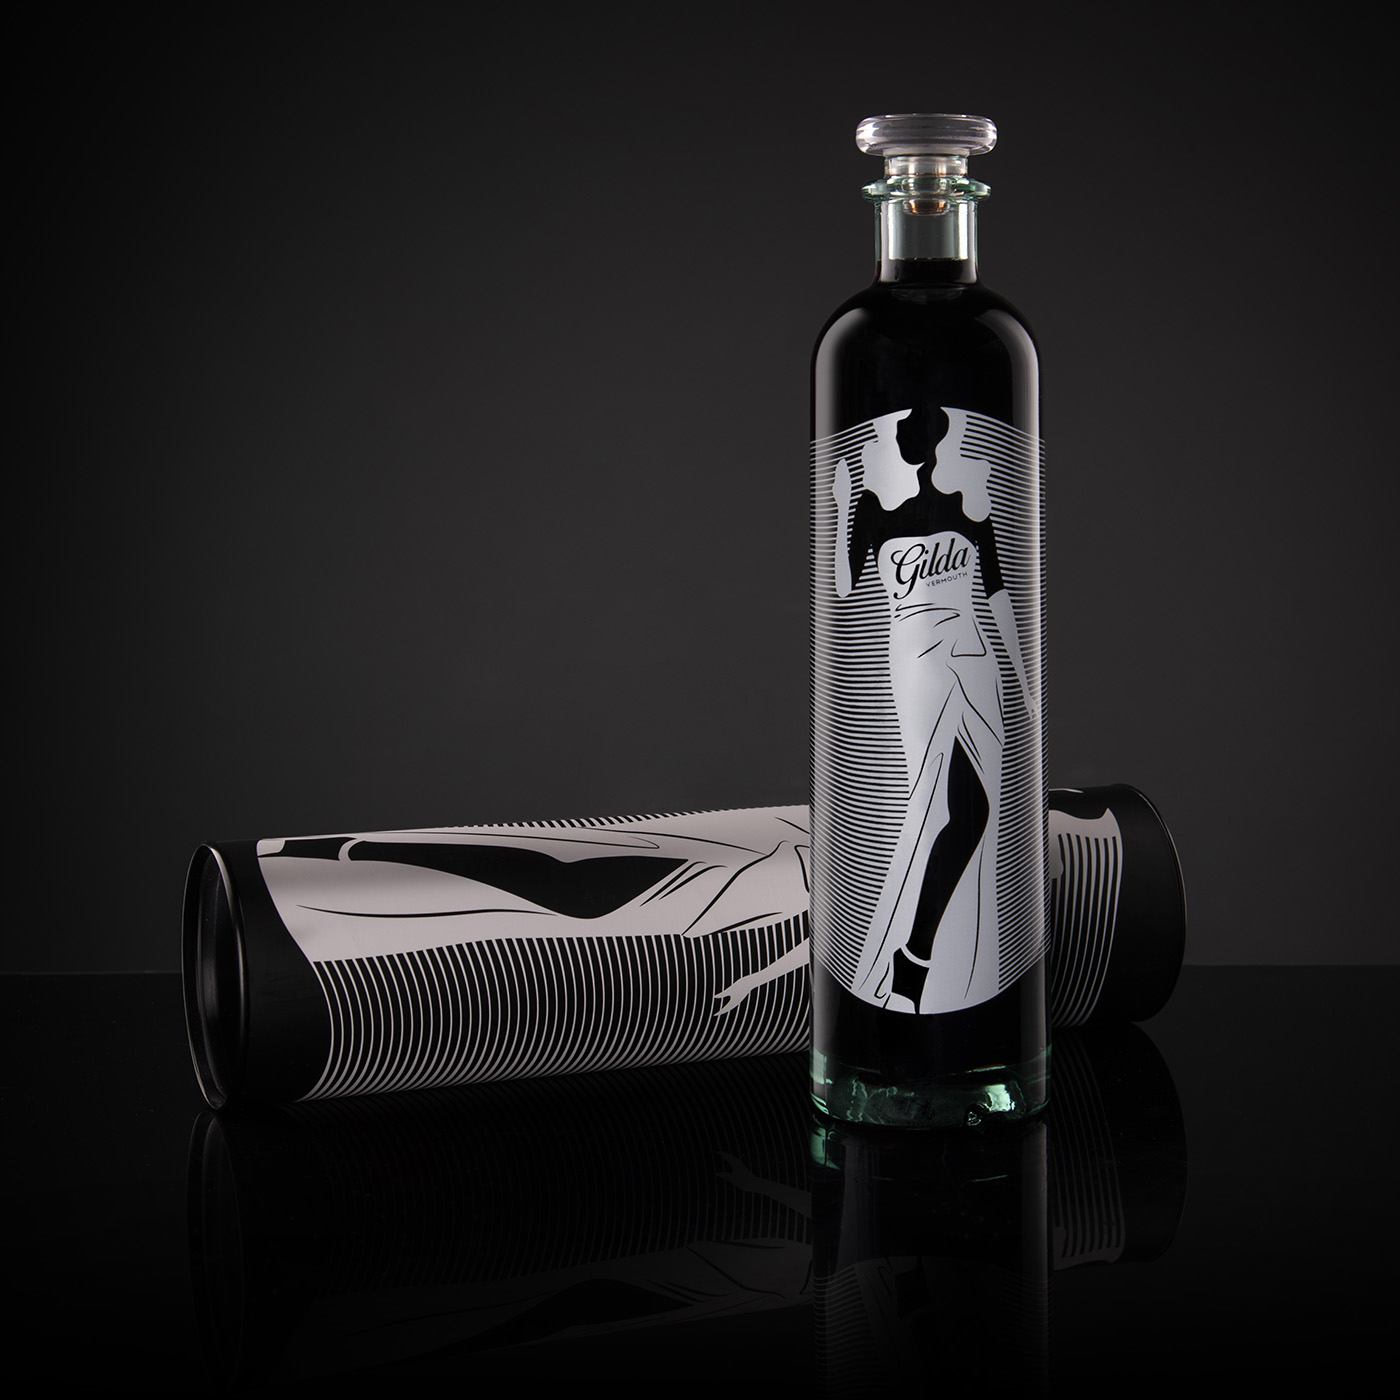 Gilda Packaging Design – A Vermouth with Much Style